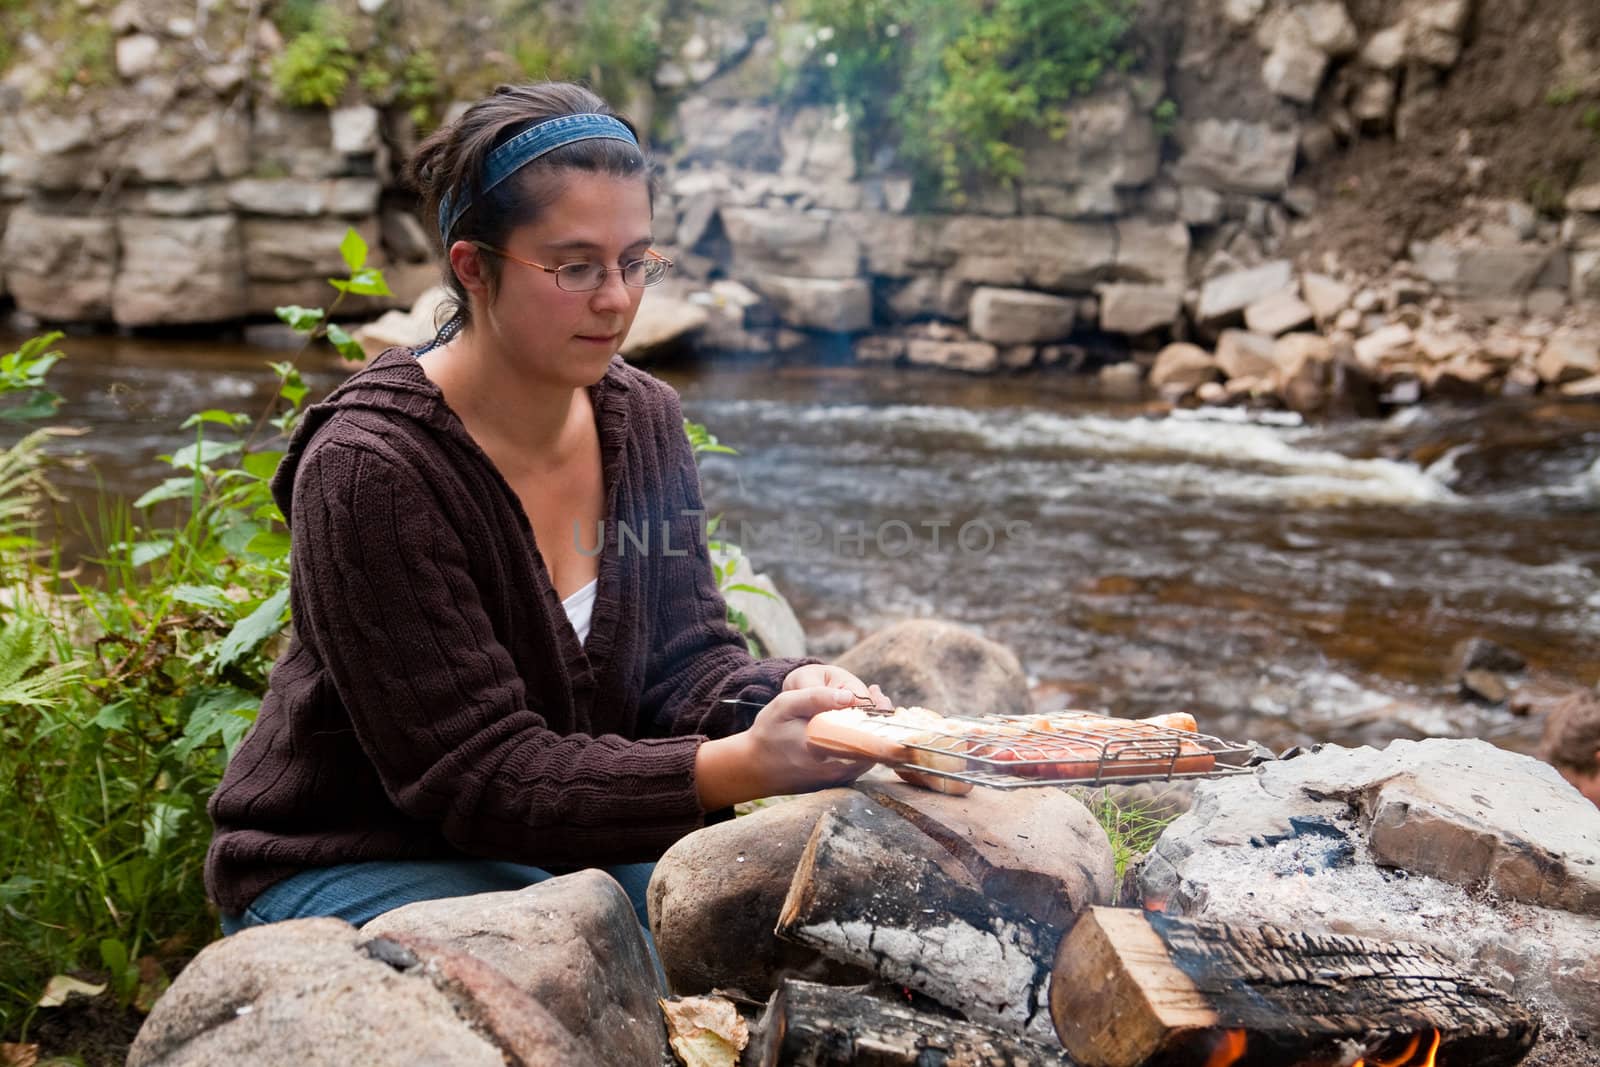 Woman cooking hotdogs over a campfire near a river